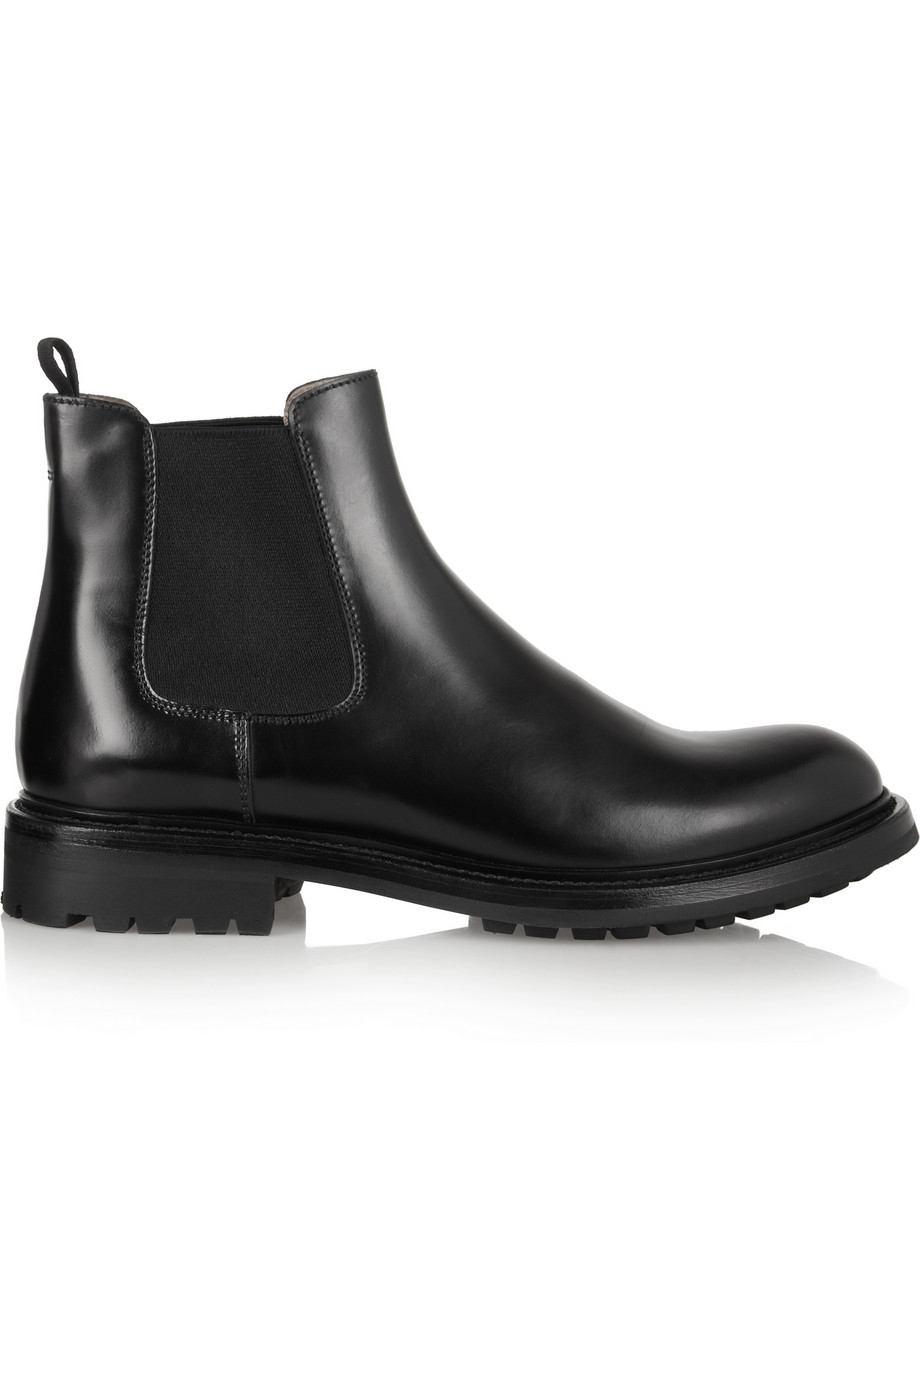 Church's Genie Leather Chelsea Boots in Black - Lyst